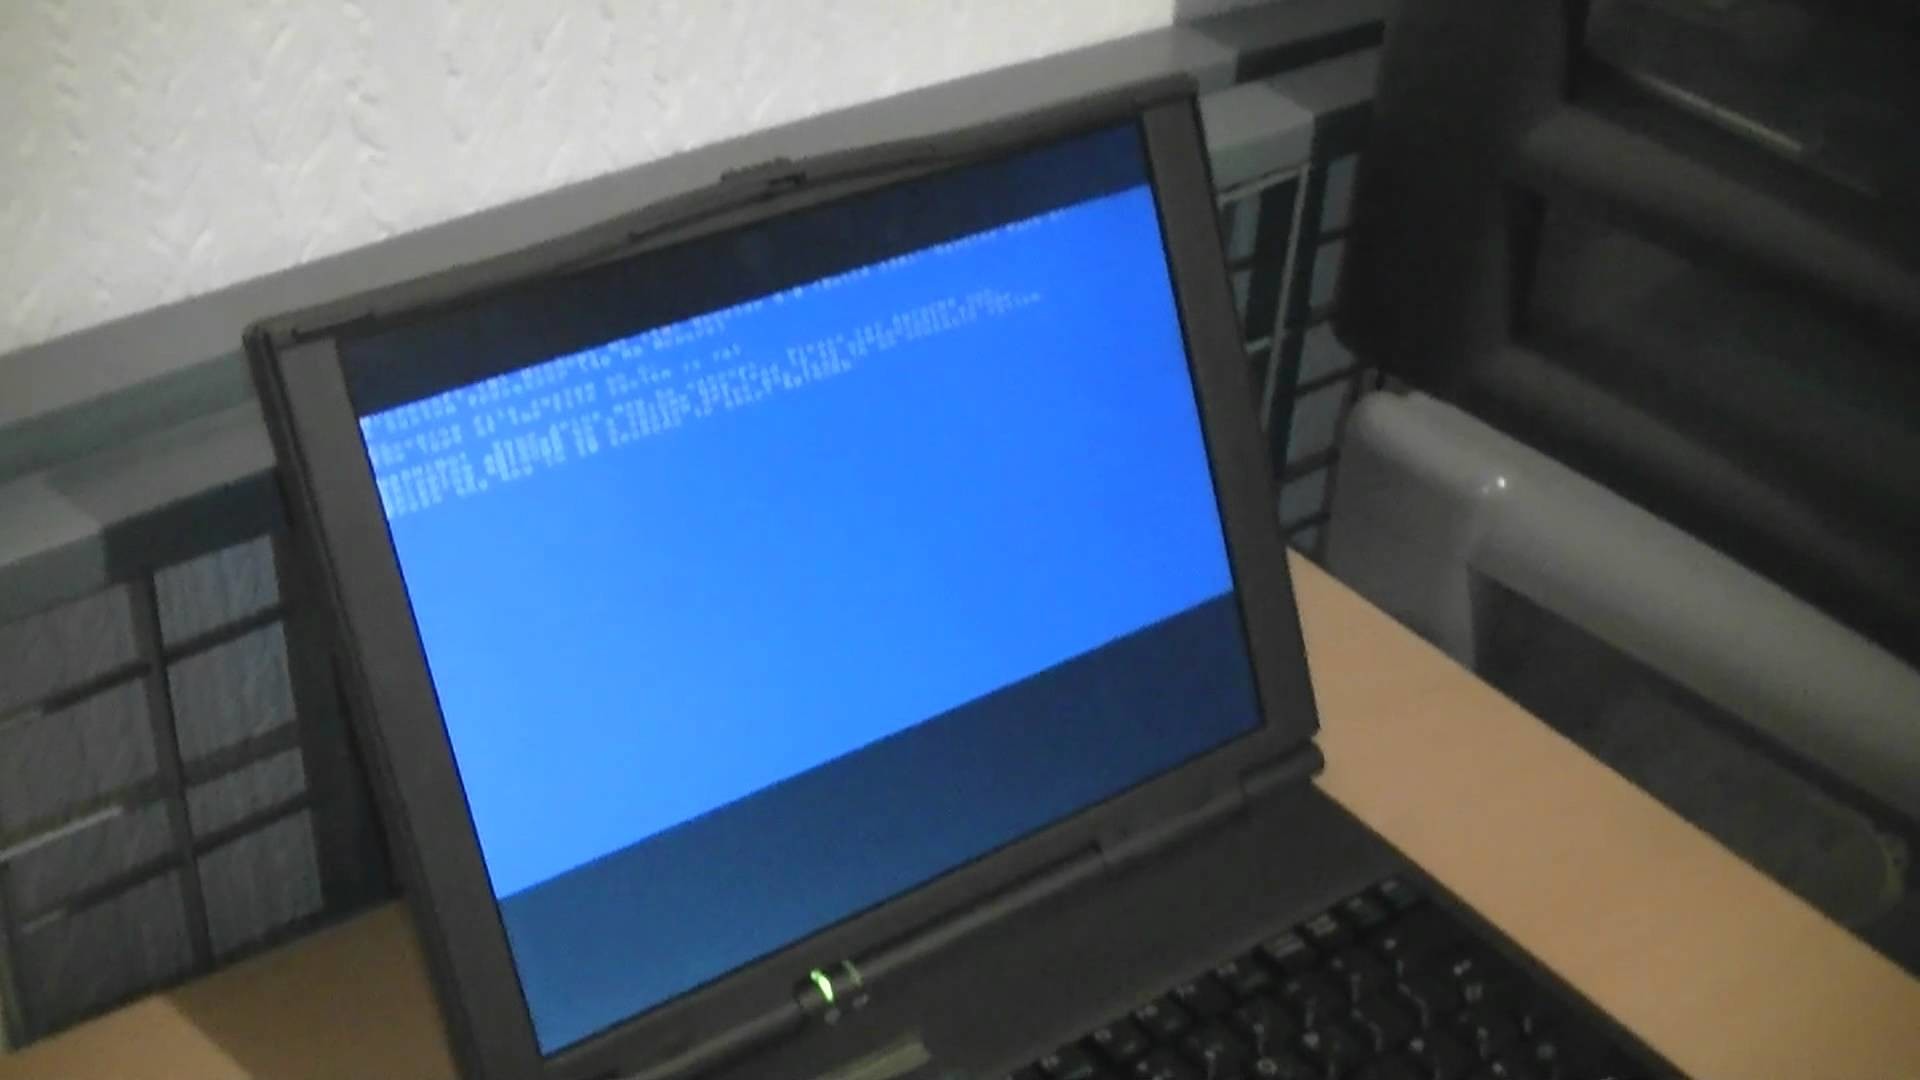 1920x1080 Windows NT 4.0 booting up on the AST Ascentia P Series